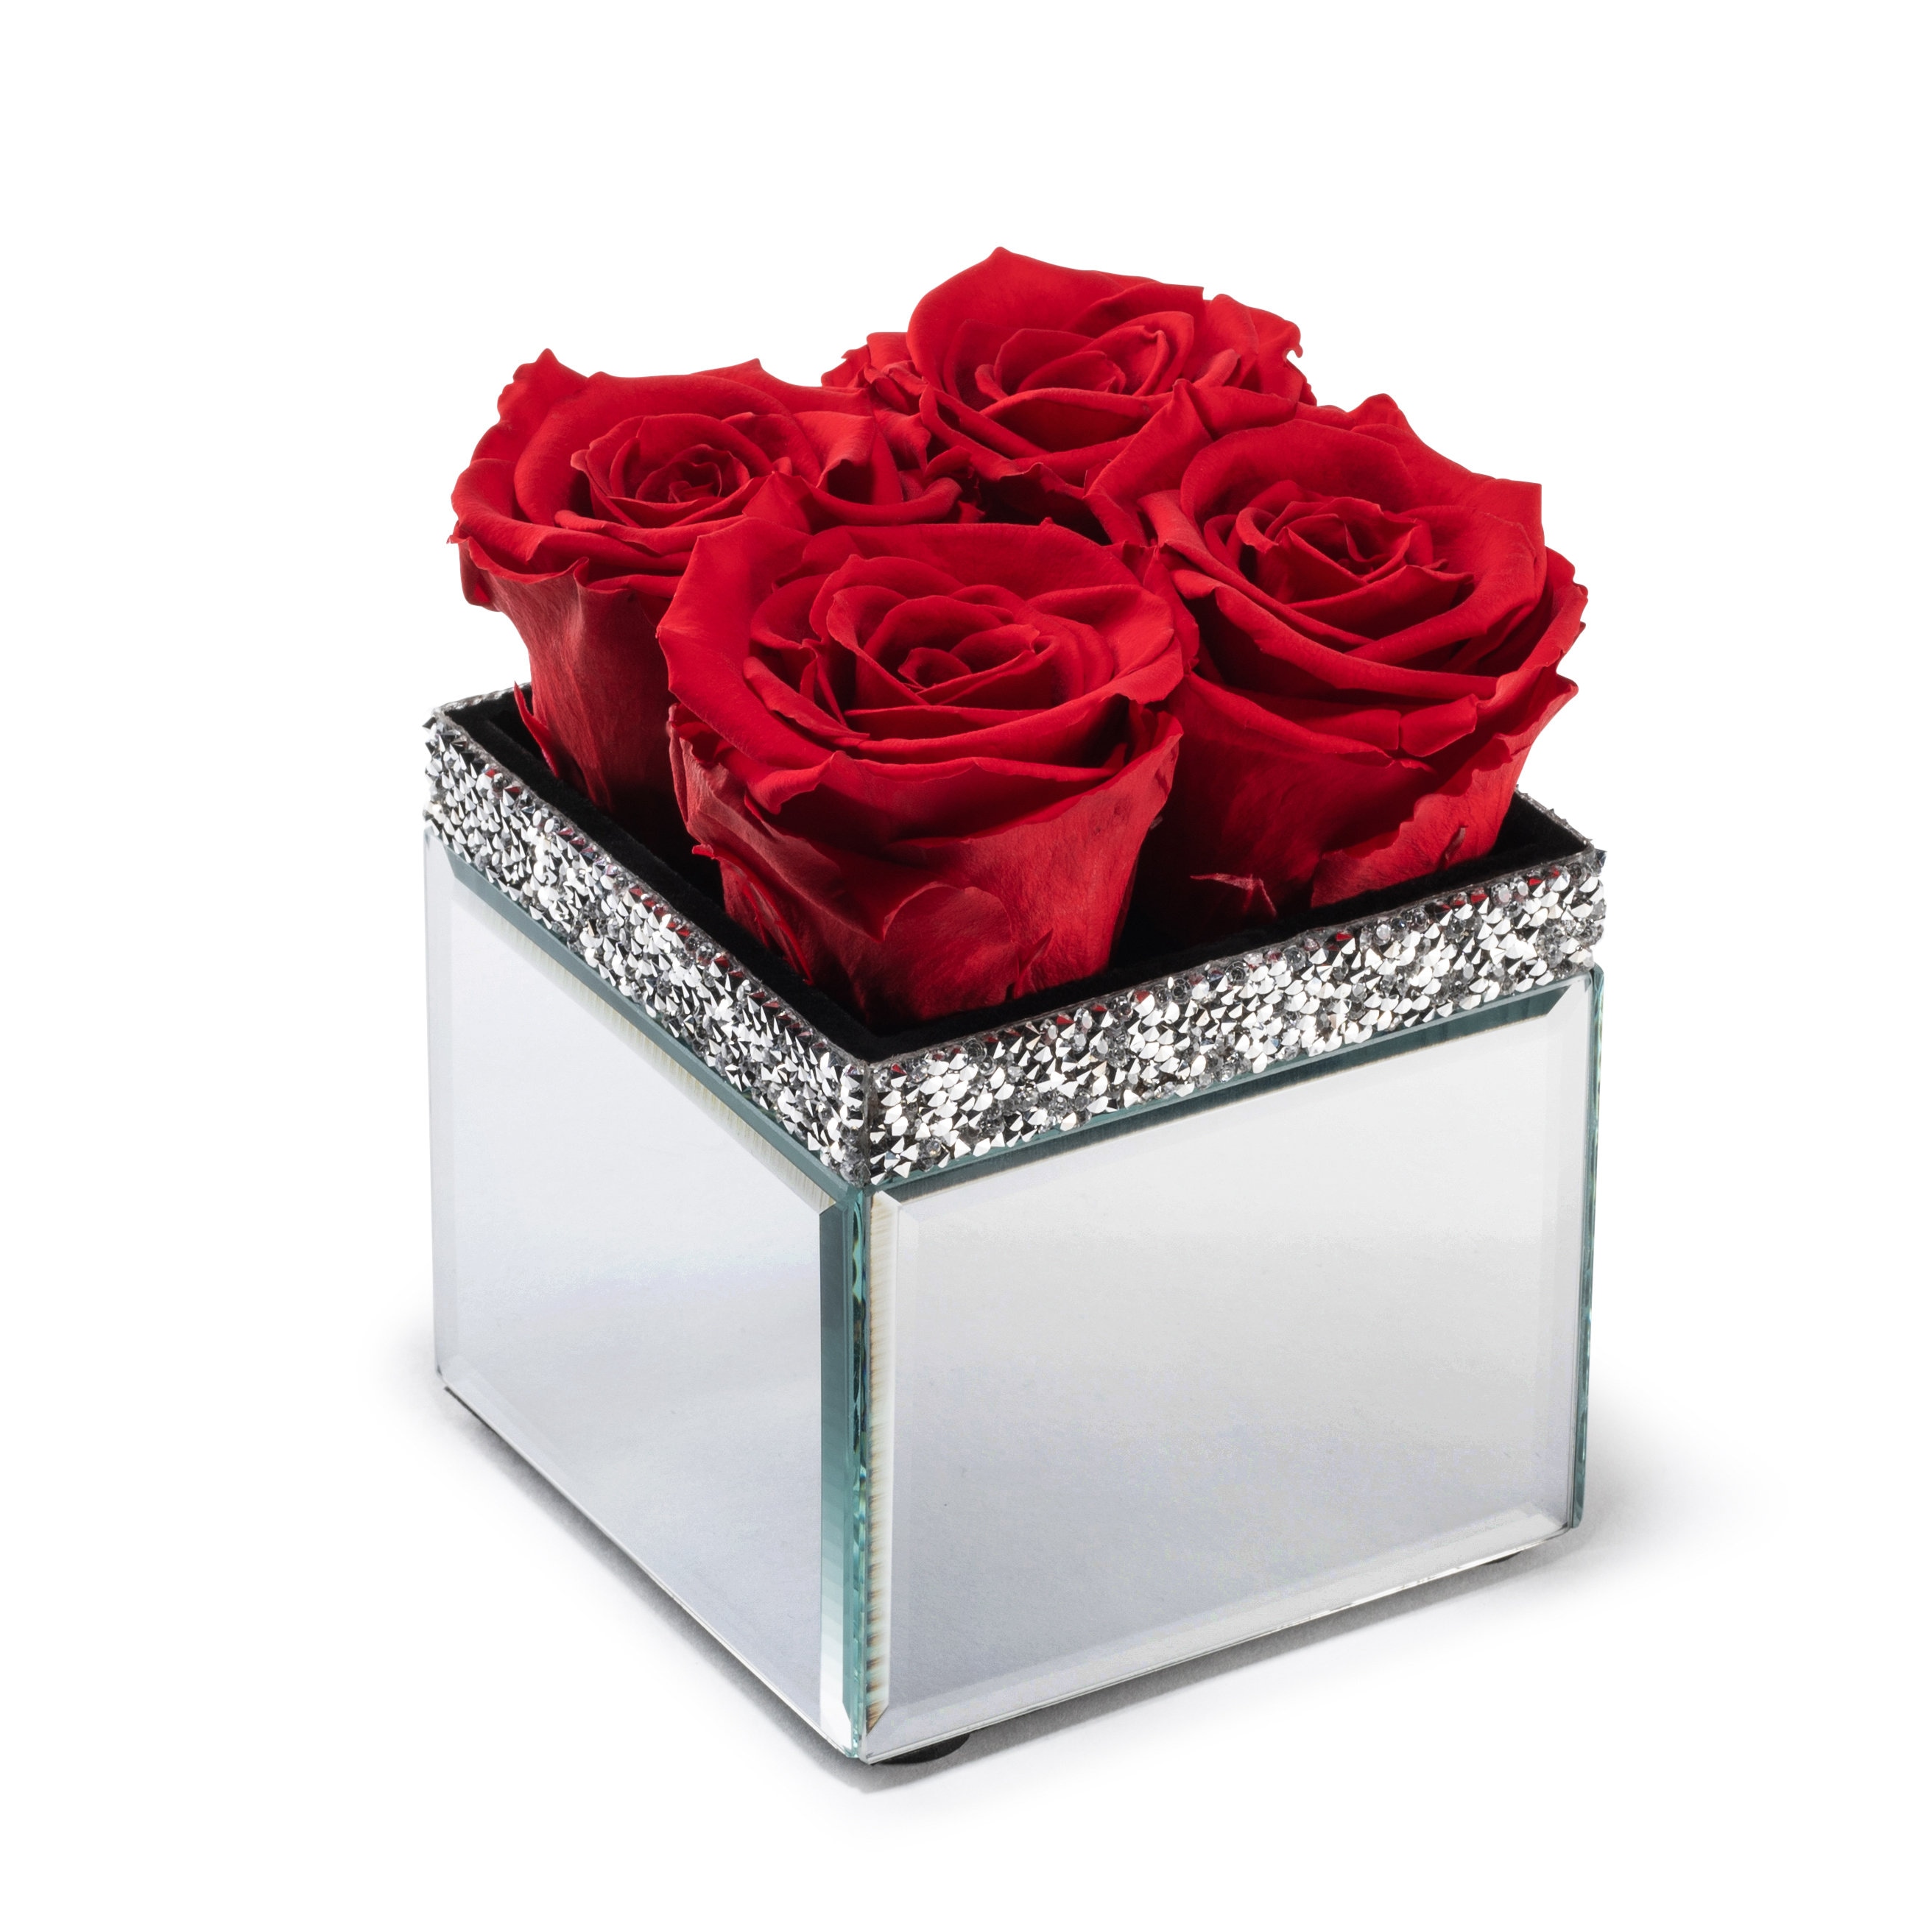 SOHO FLORAL ARTS New Roses Preserved Flowers Genuine Roses That Lasts for 